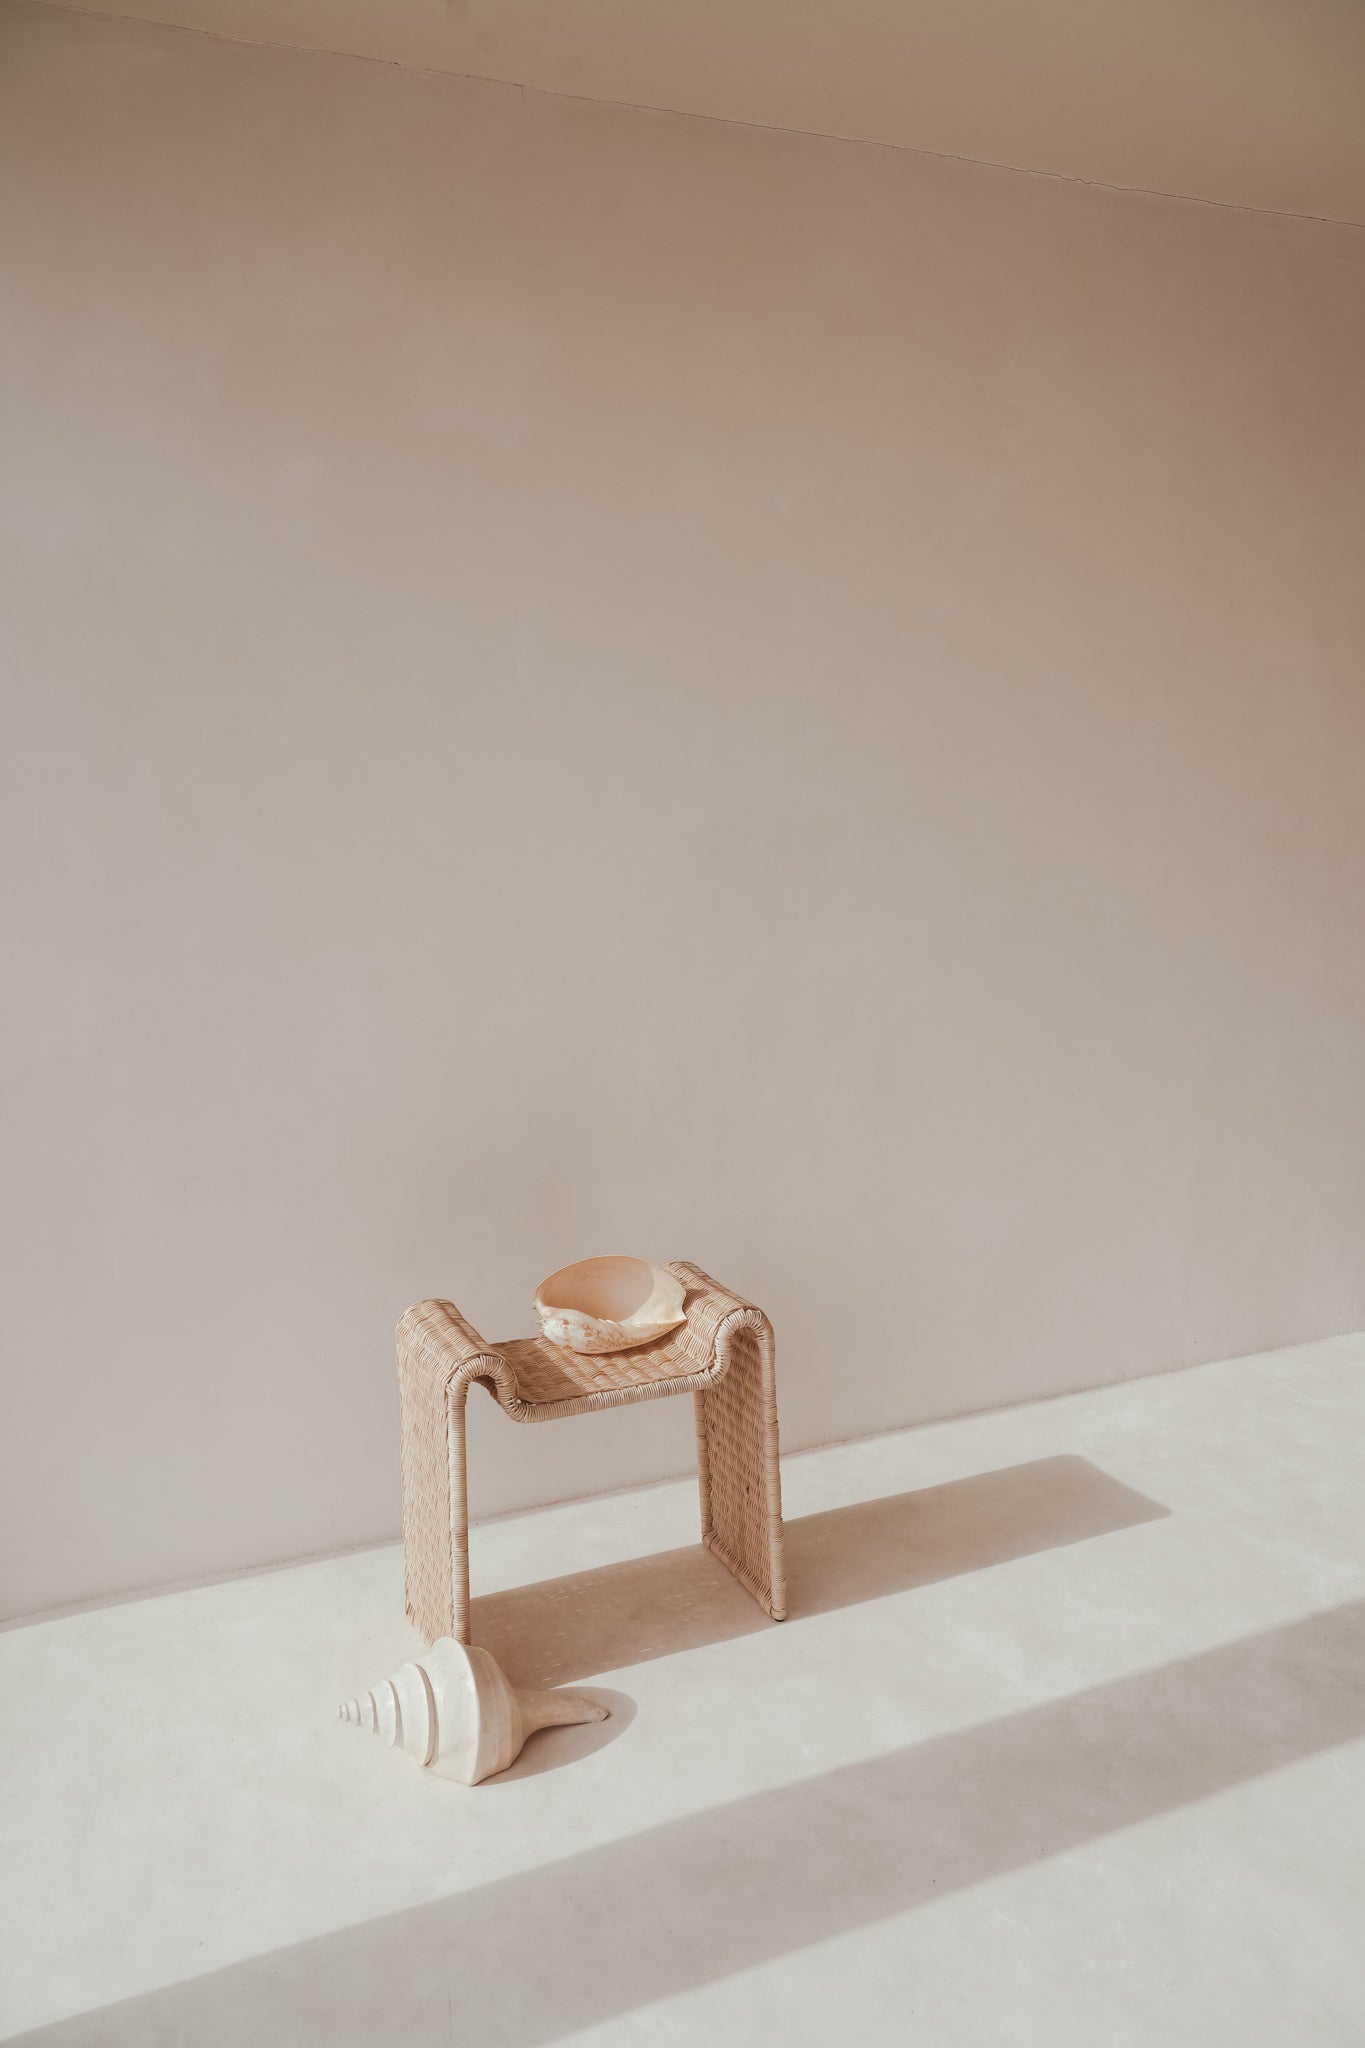 THE PALMA SIDE TABLE